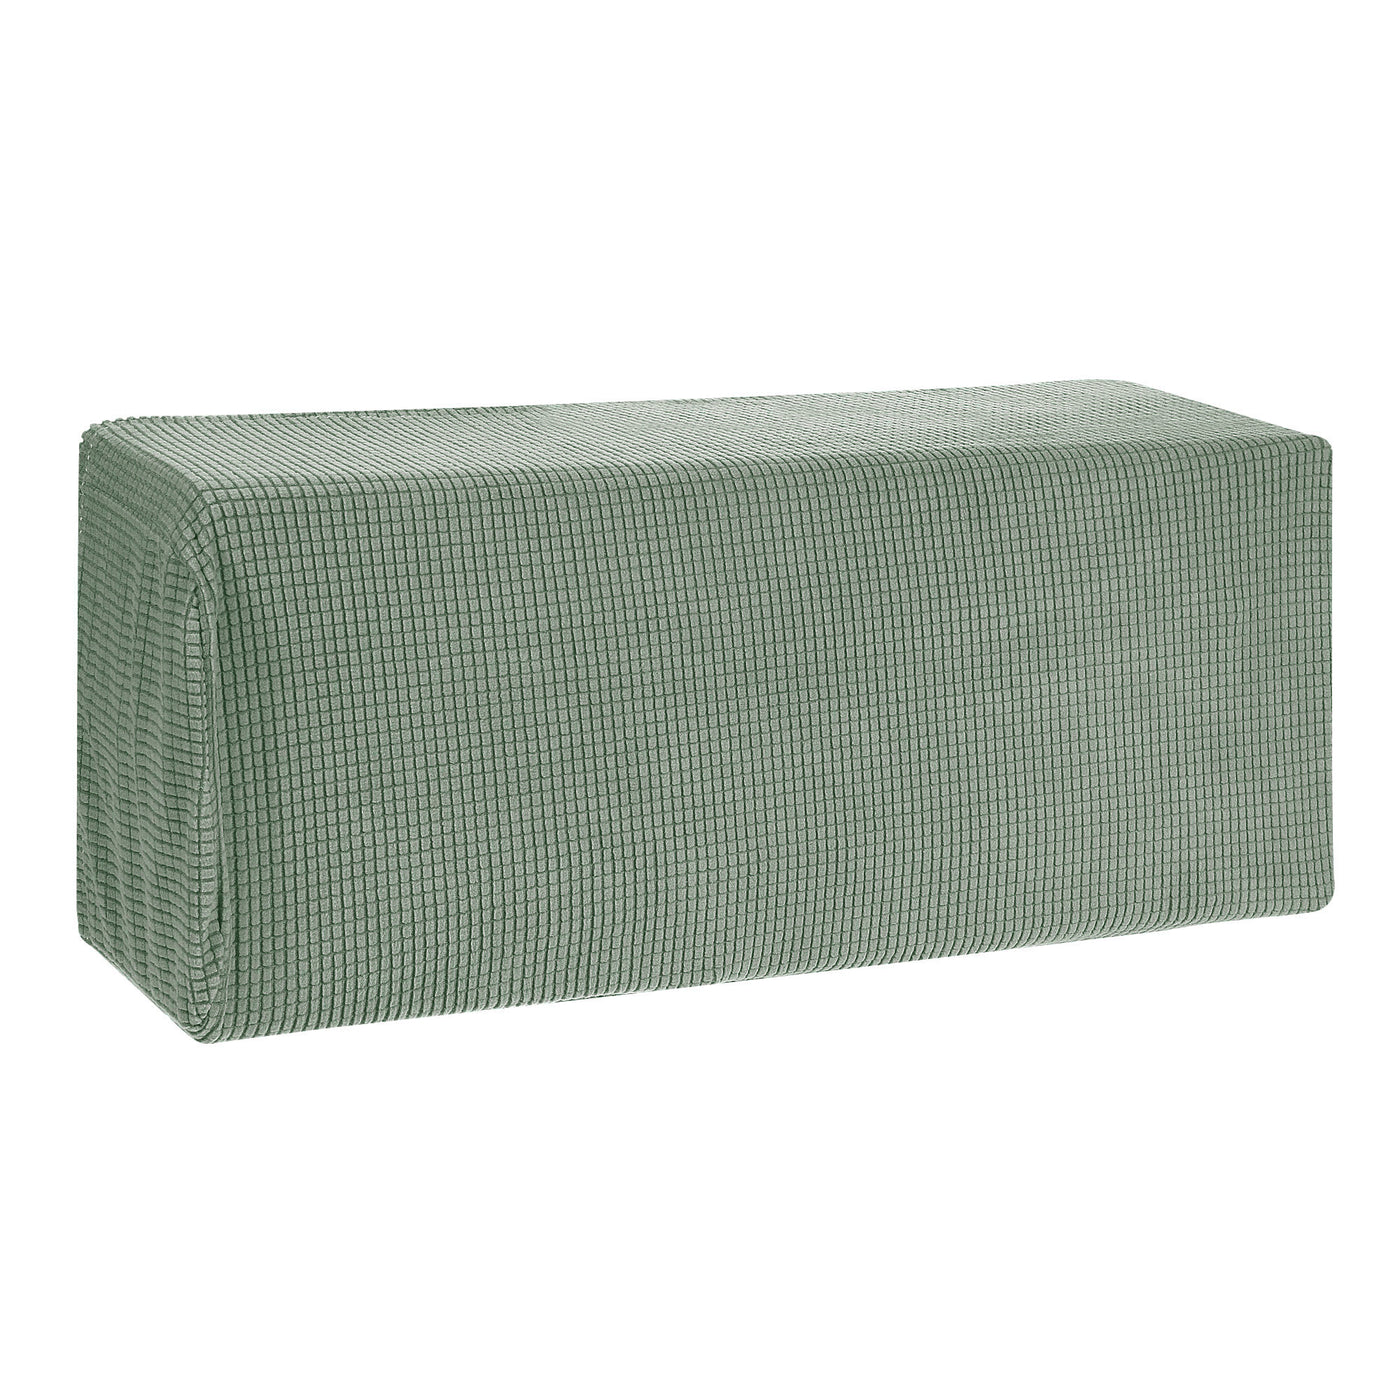 Harfington Air Conditioner Cover 35-37 Inch Knitted Elastic Cloth Dustproof for Wall-Mounted Units Split Indoor AC Covers, Green